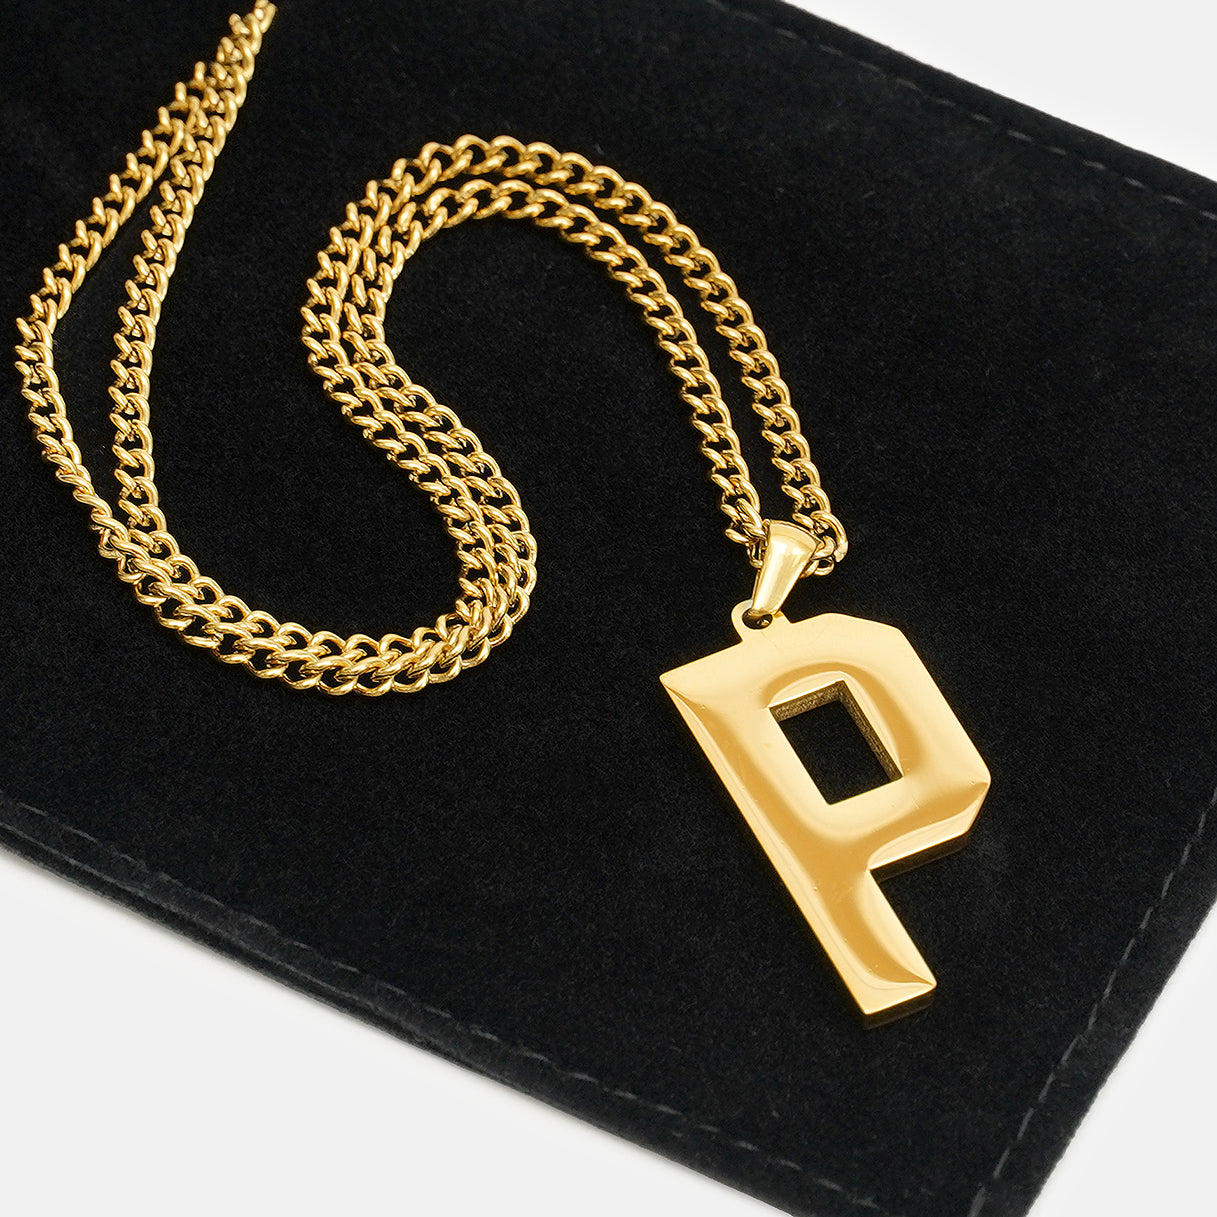 P Letter Pendant with Chain Kids Necklace - Gold Plated Stainless Steel